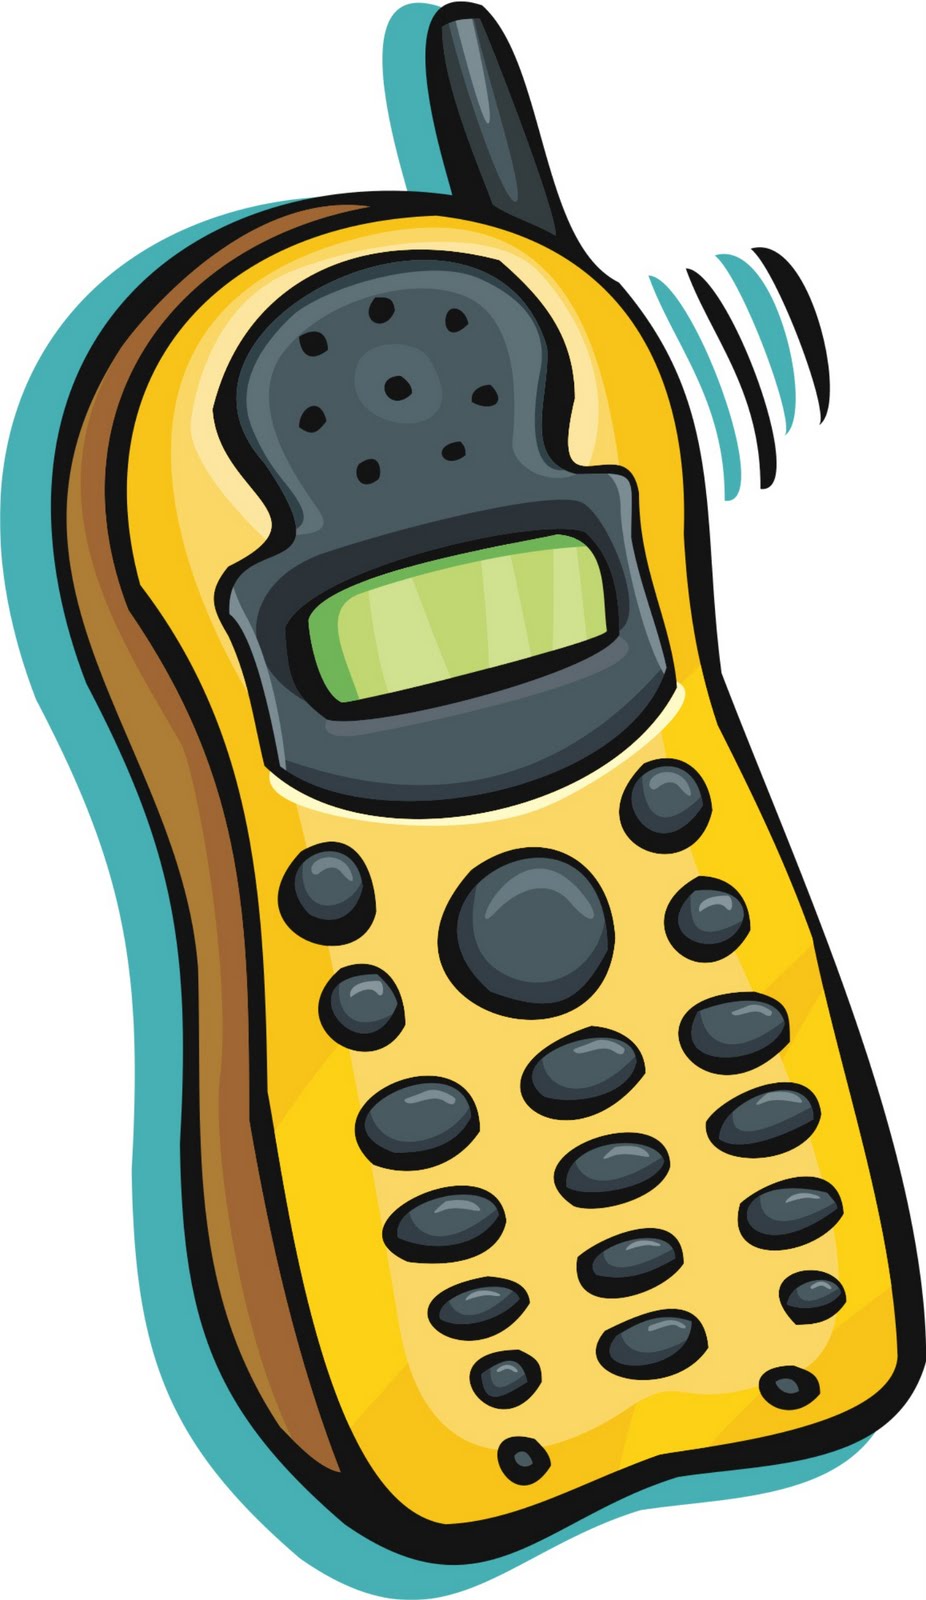 Phone call clipart free clipart images